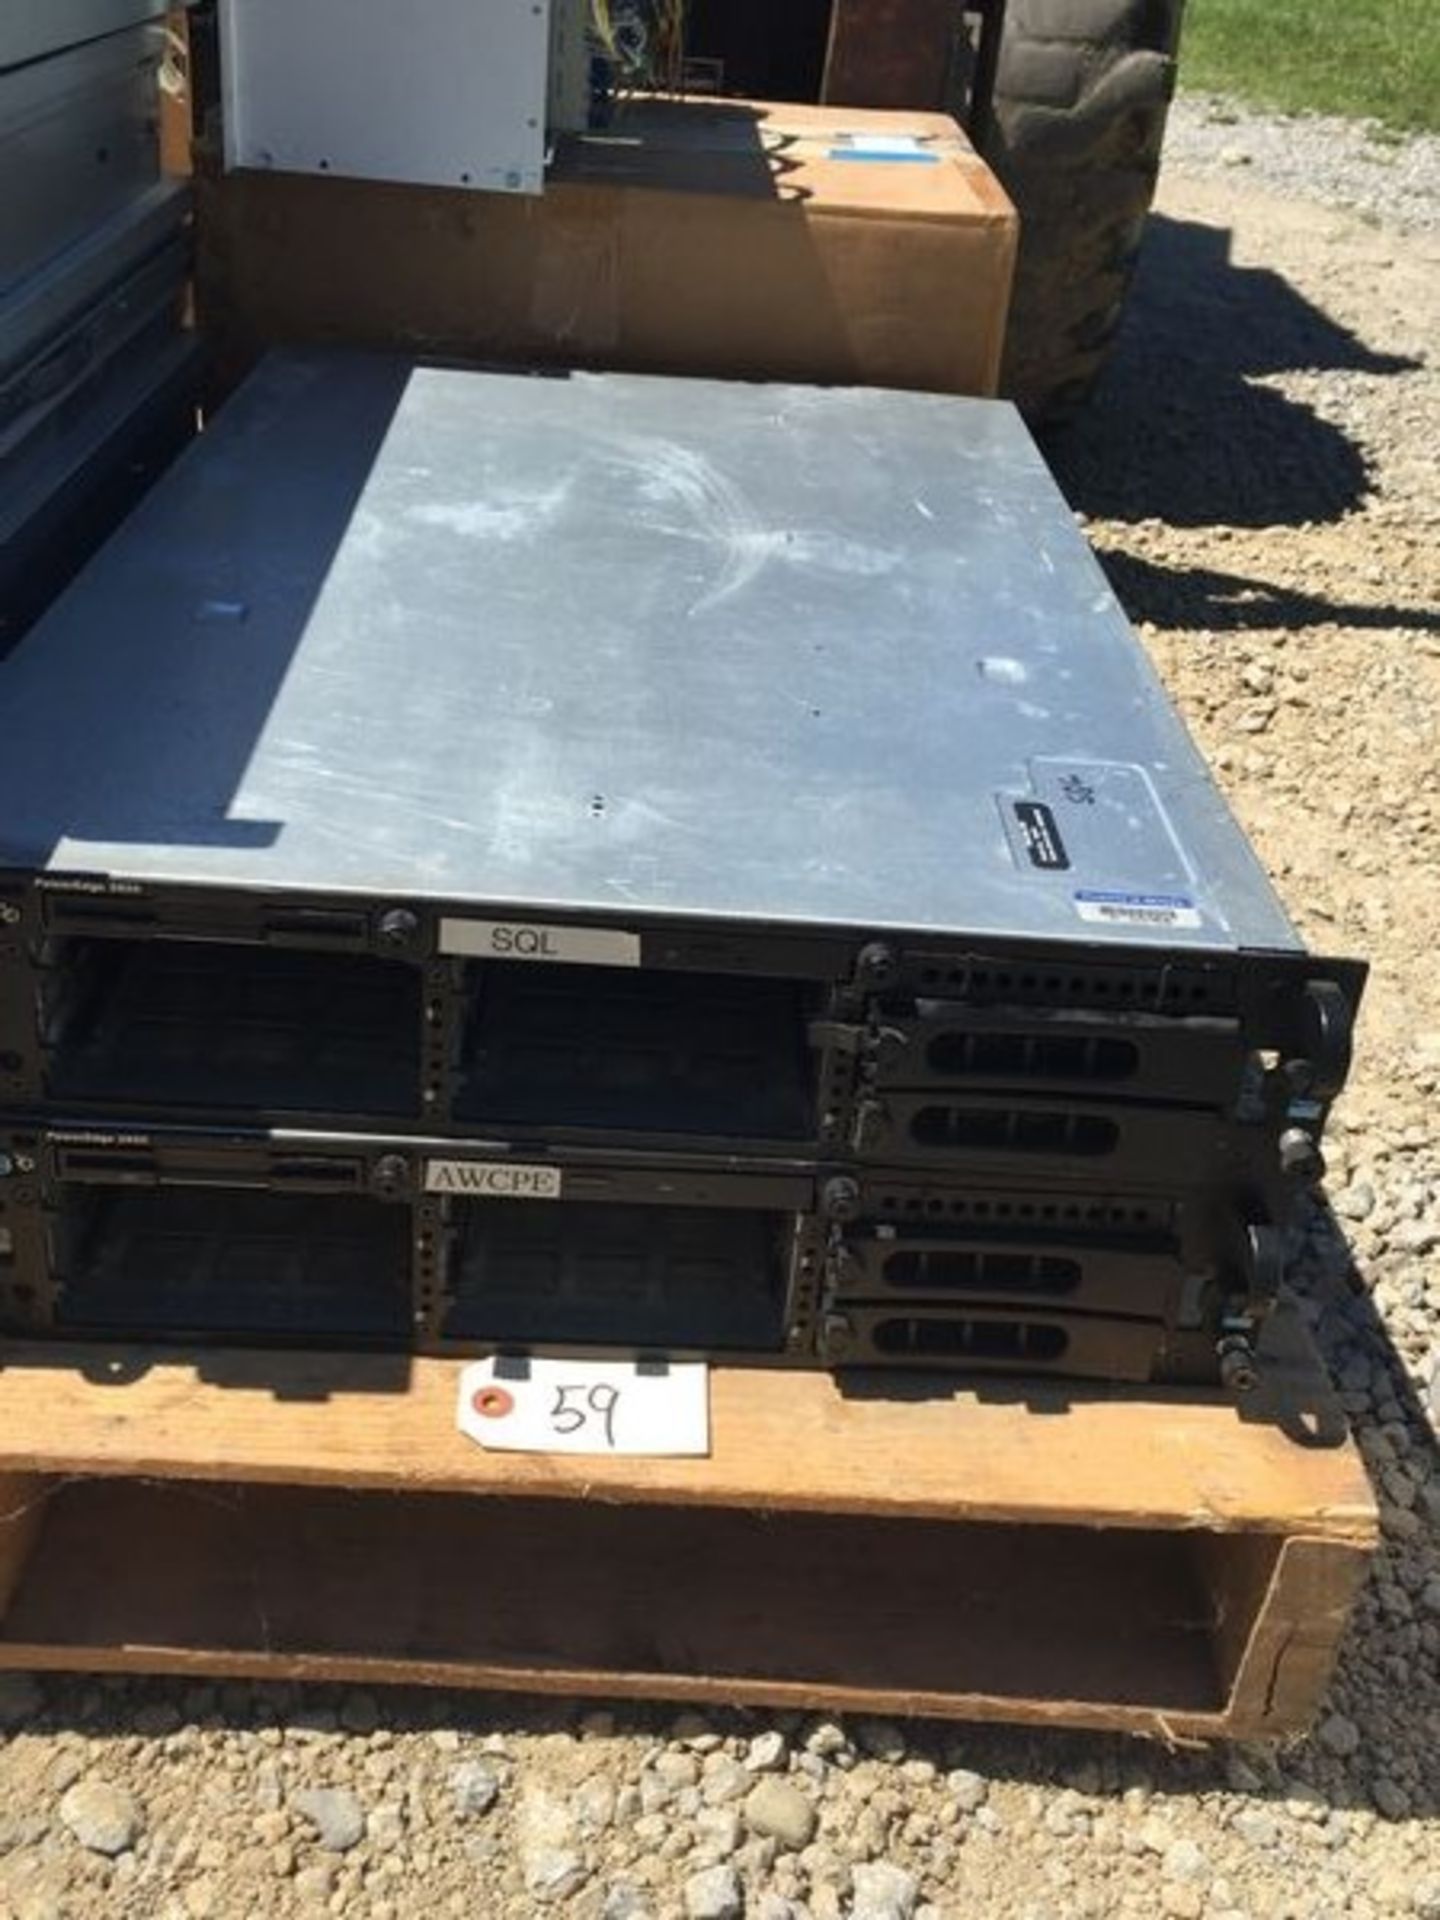 Lot of Dell Server Equipment - Image 2 of 3